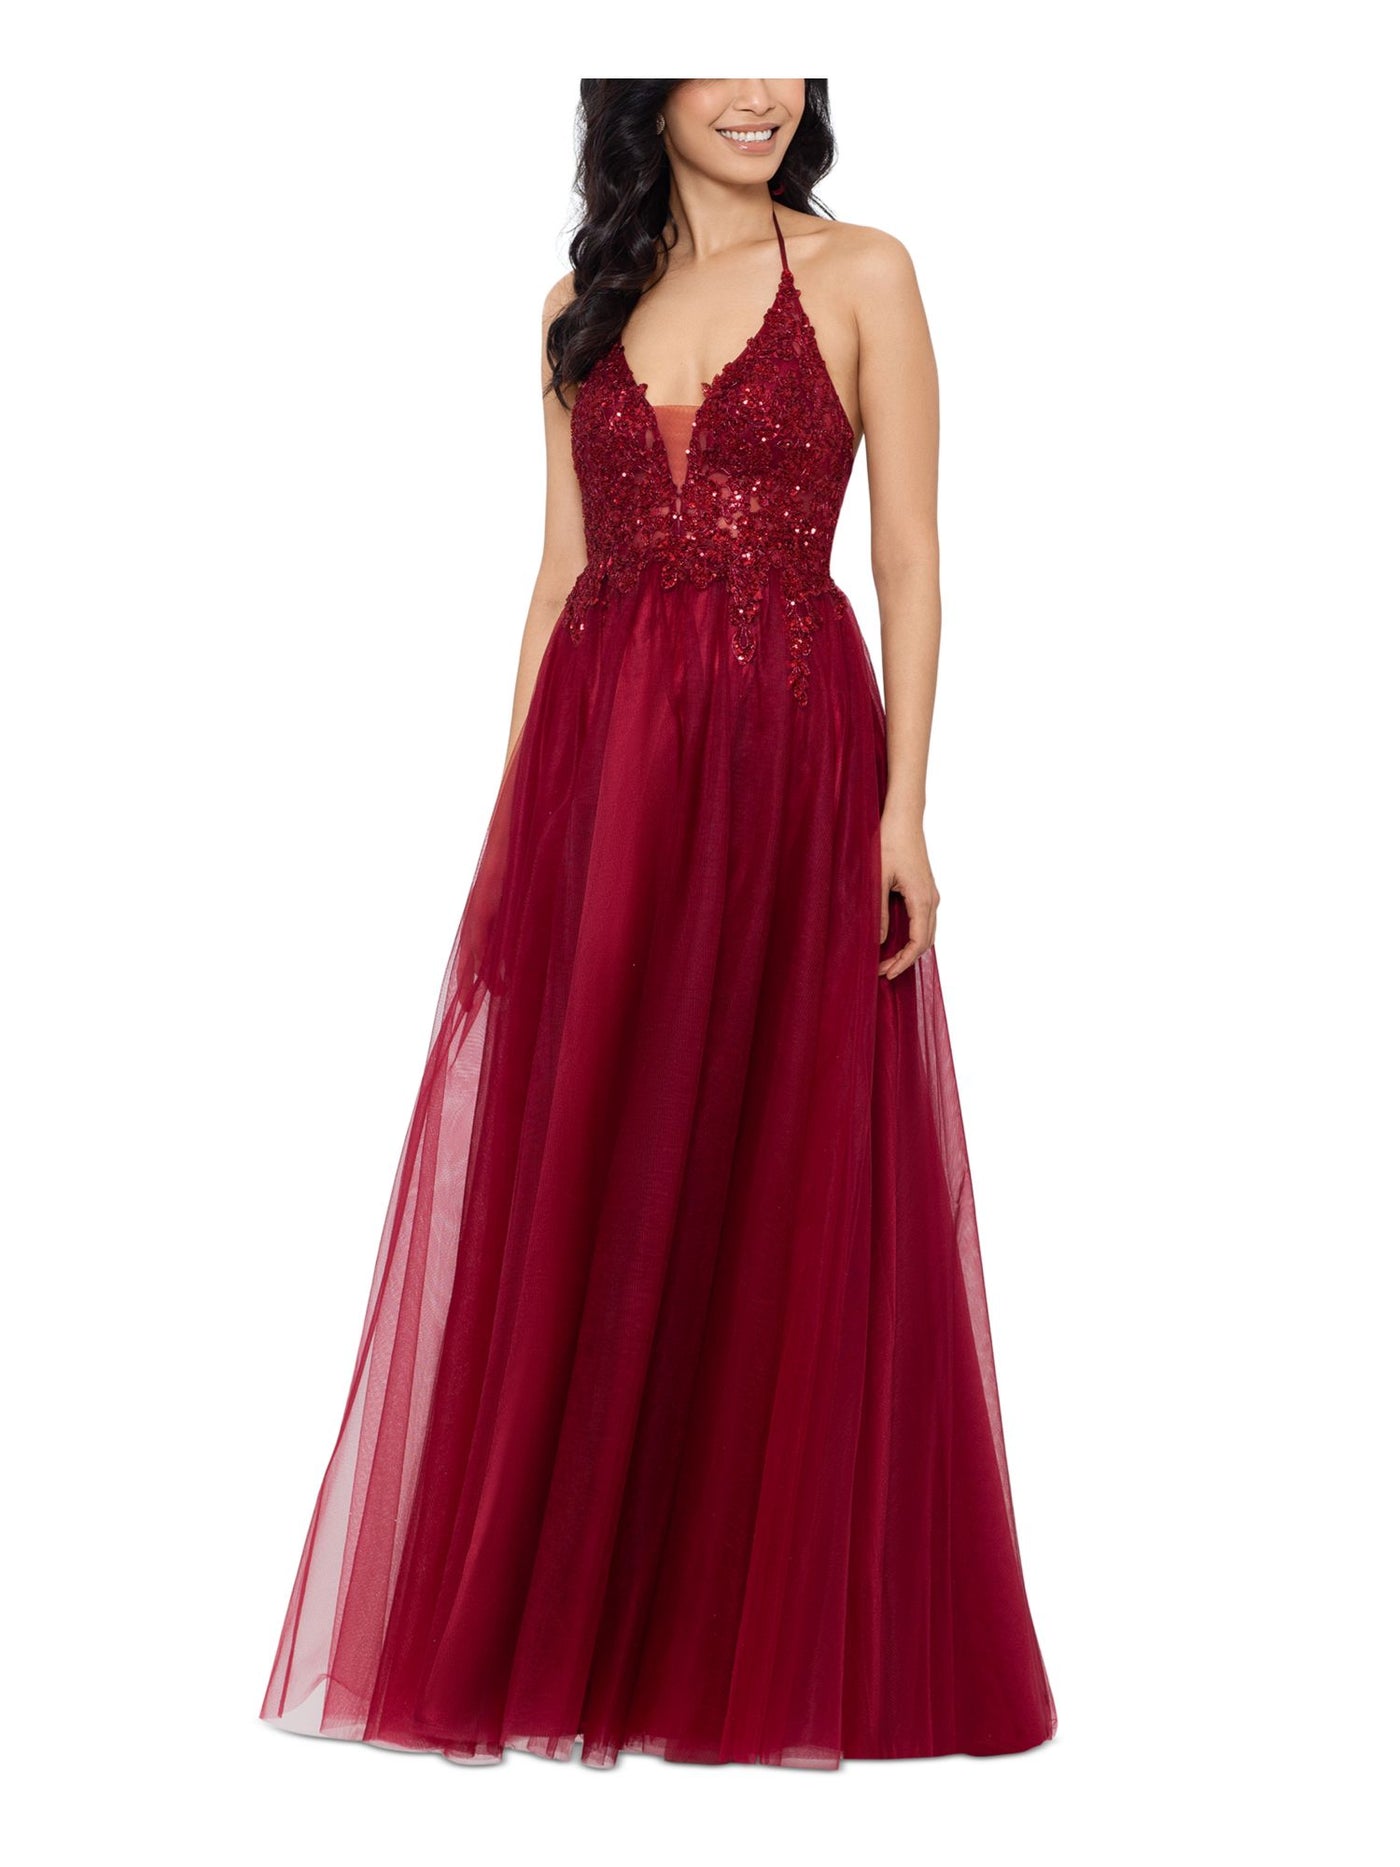 BLONDIE NITES Womens Maroon Sequined Zippered Lined Sleeveless V Neck Full-Length Prom Gown Dress 15